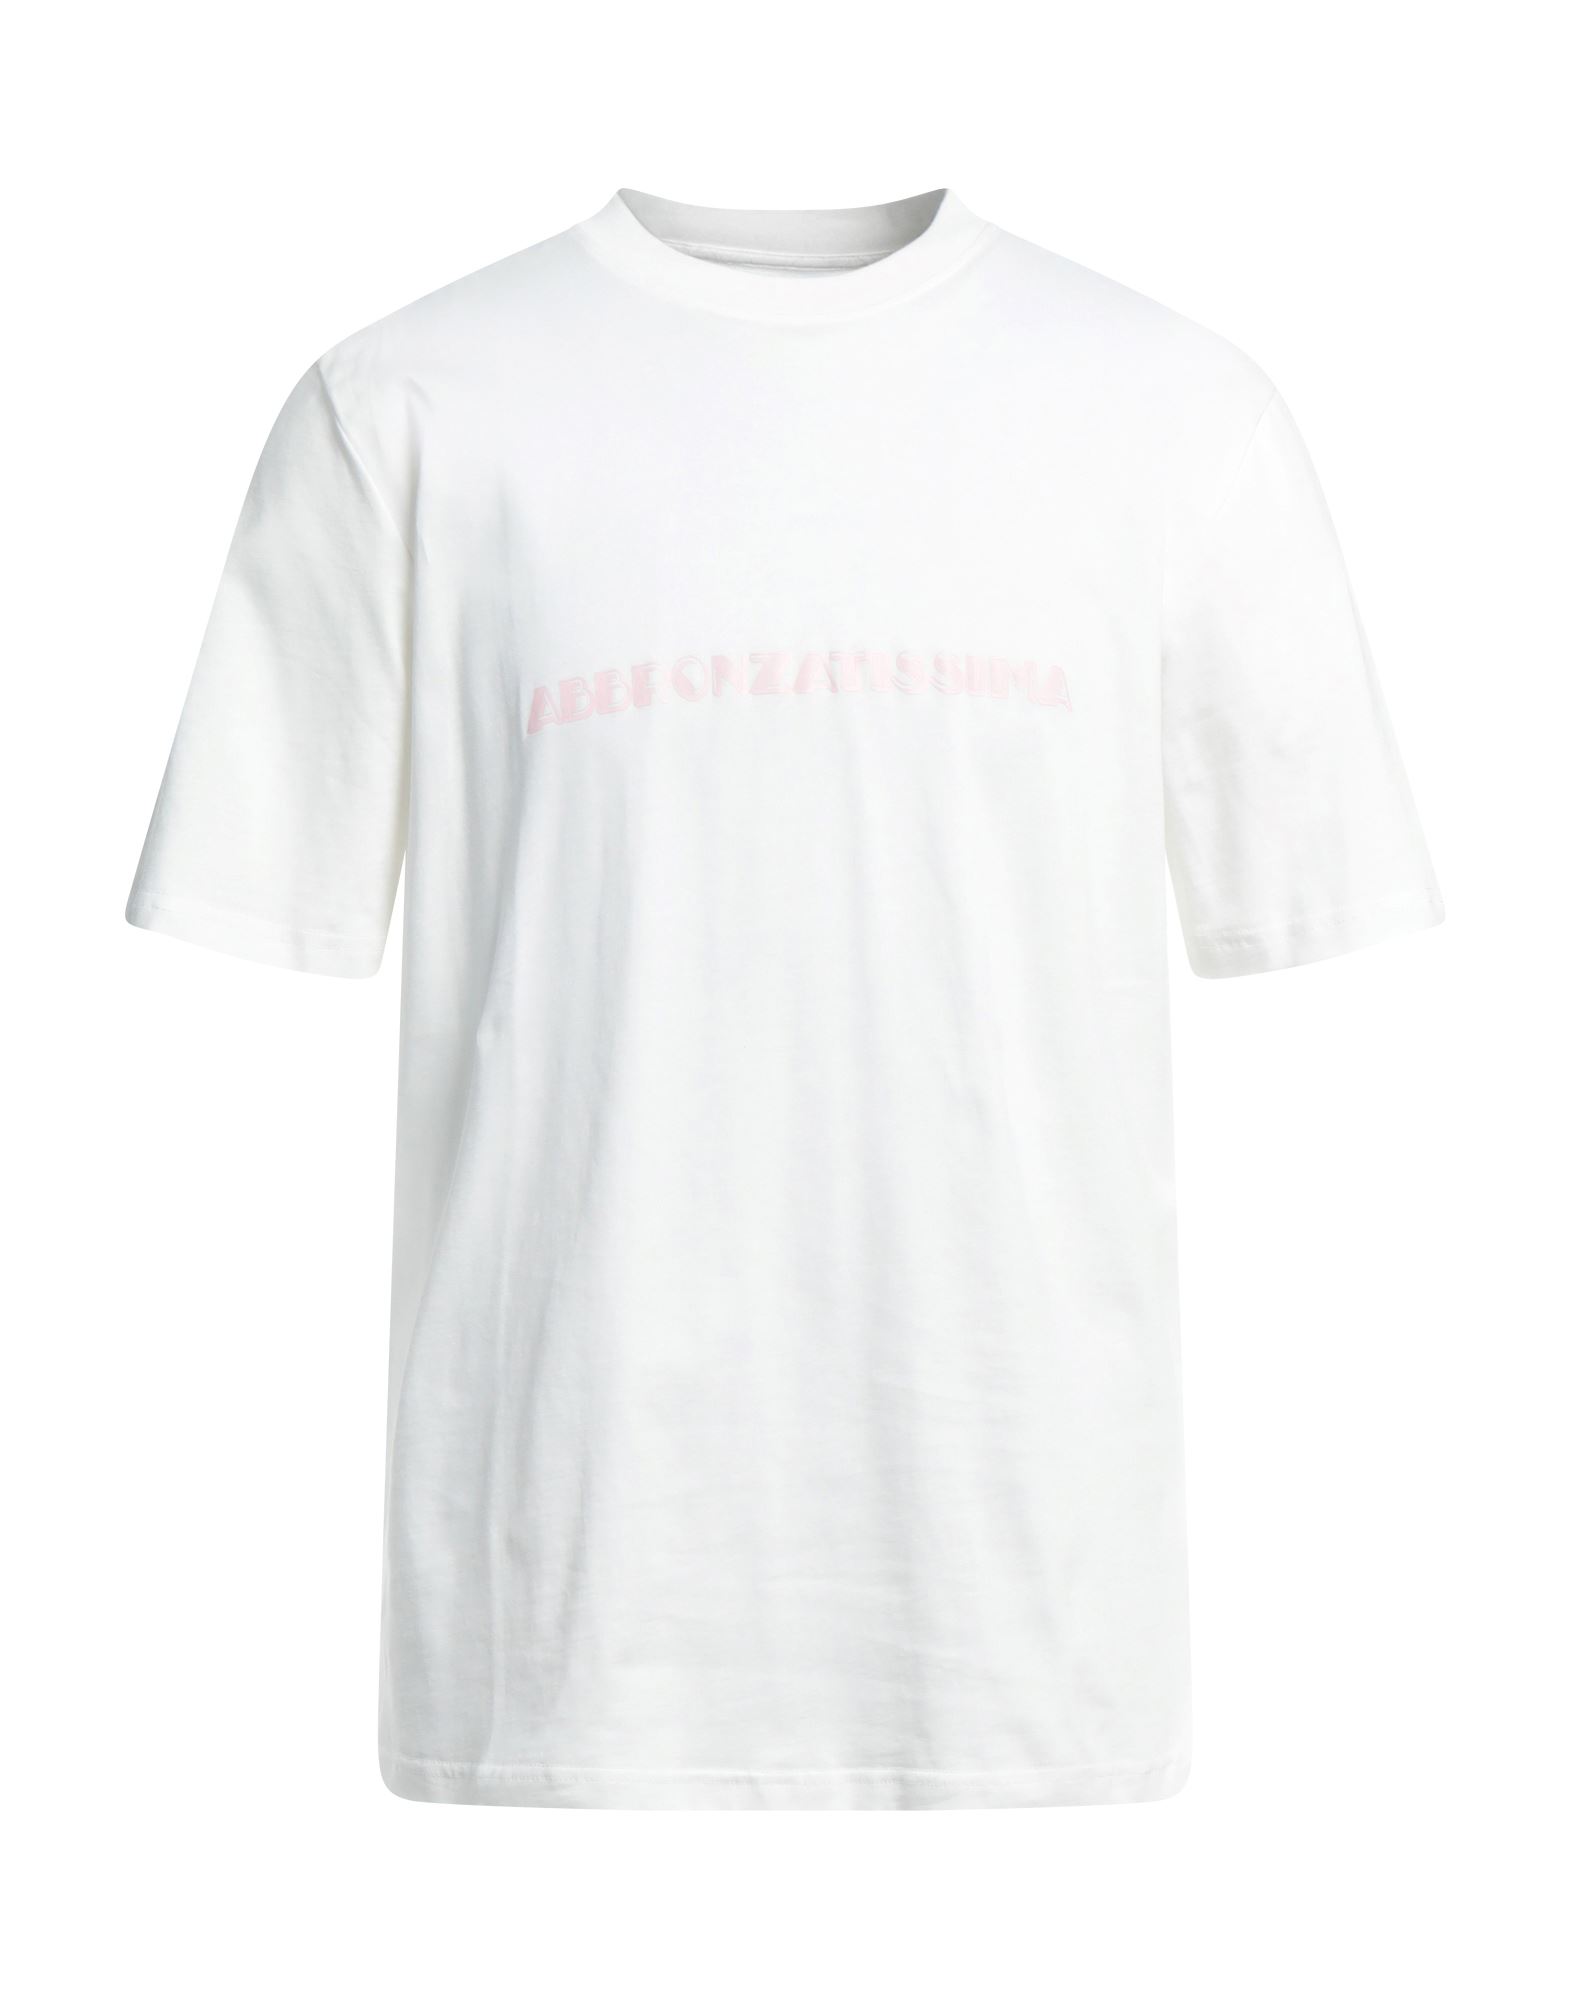 3dici T-shirts In White